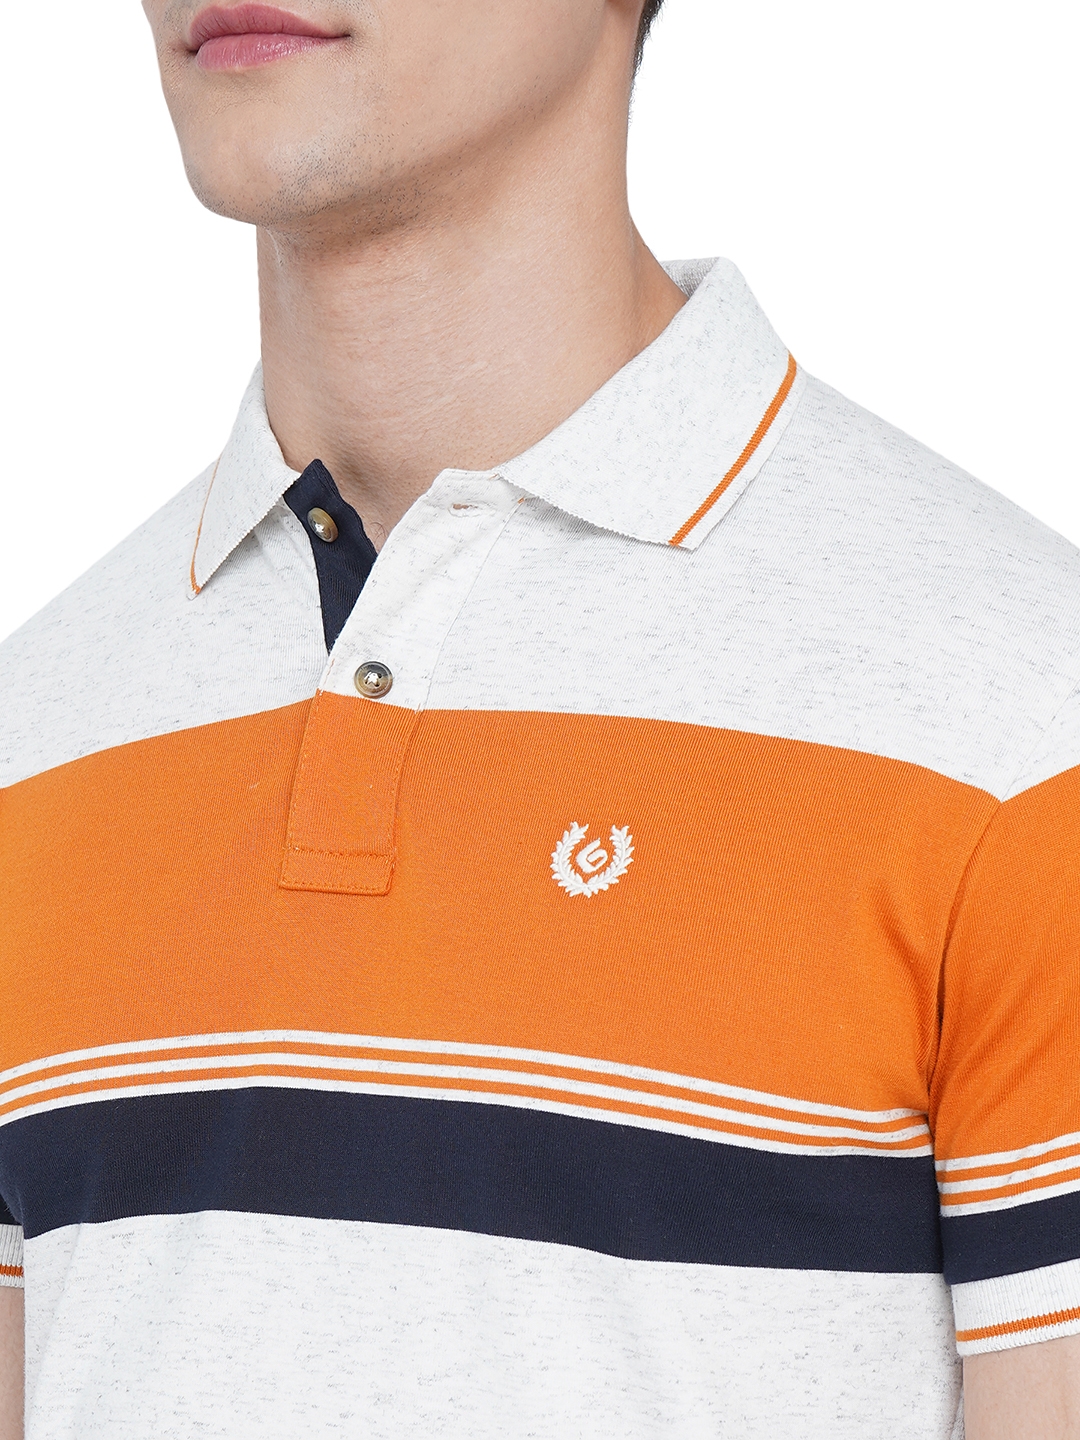 Greenfibre | White Striped Slim Fit Polo T-Shirt | Greenfibre 4